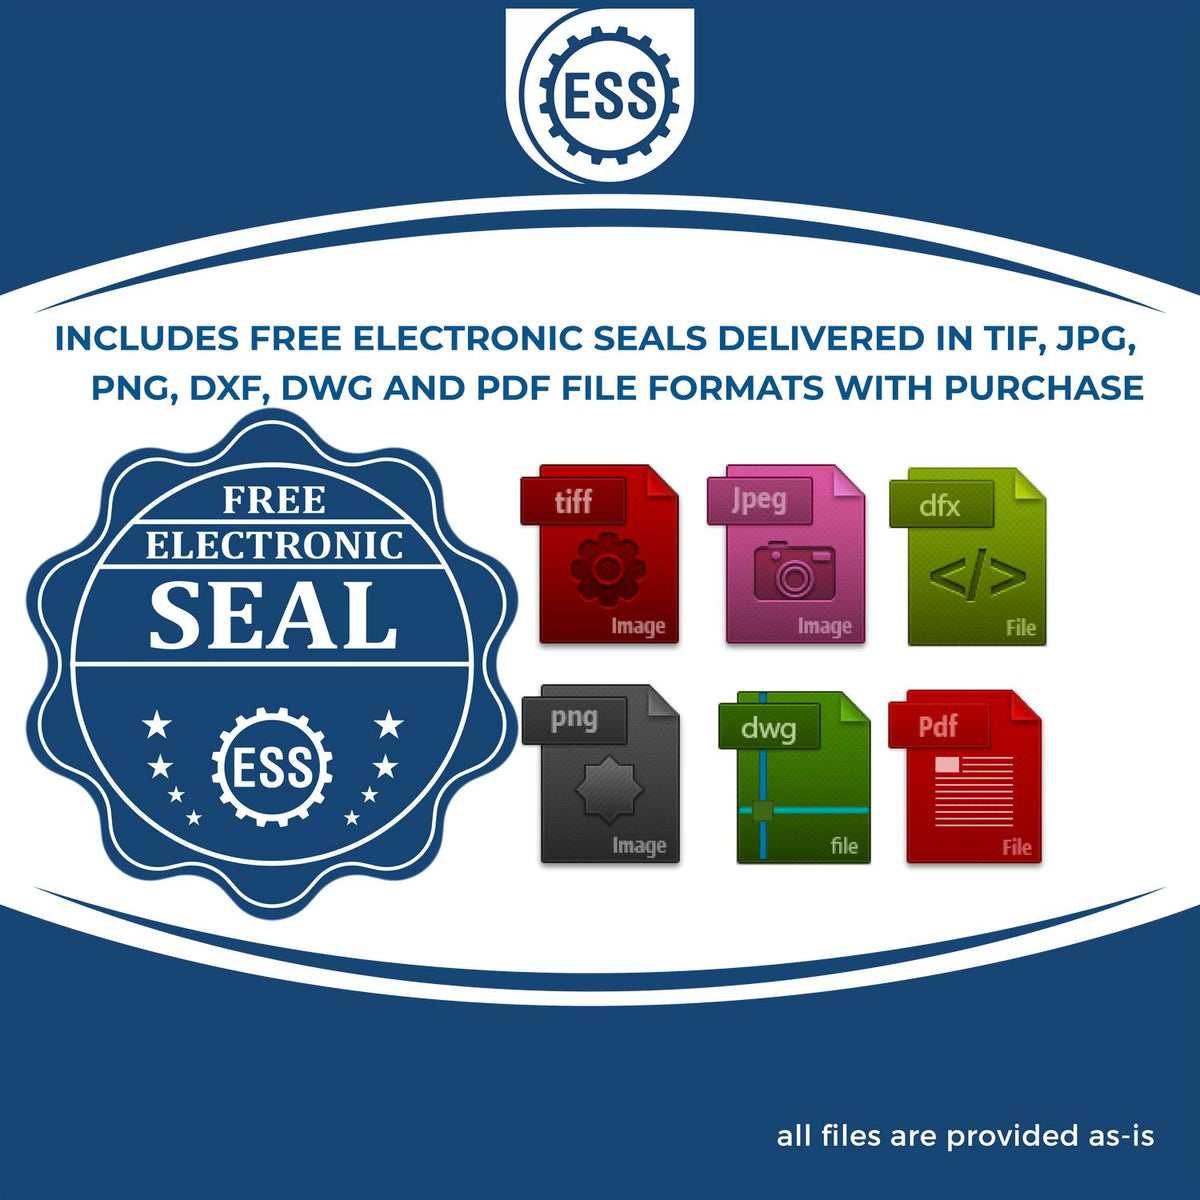 An infographic for the free electronic seal for the Vermont Geologist Desk Seal illustrating the different file type icons such as DXF, DWG, TIF, JPG and PNG.